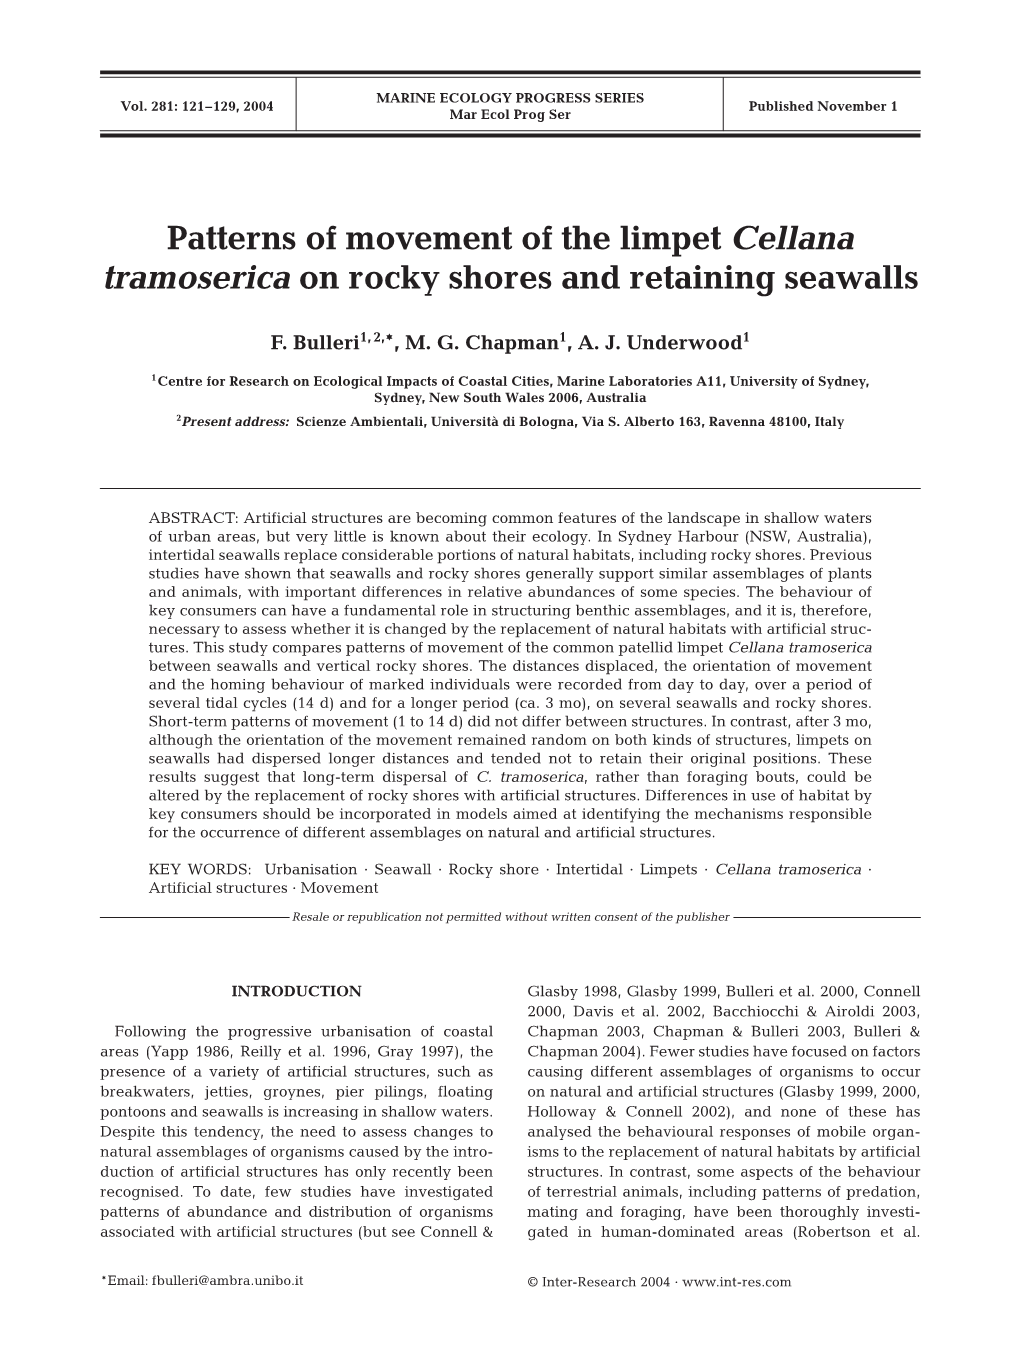 Patterns of Movement of the Limpet Cellana Tramoserica on Rocky Shores and Retaining Seawalls